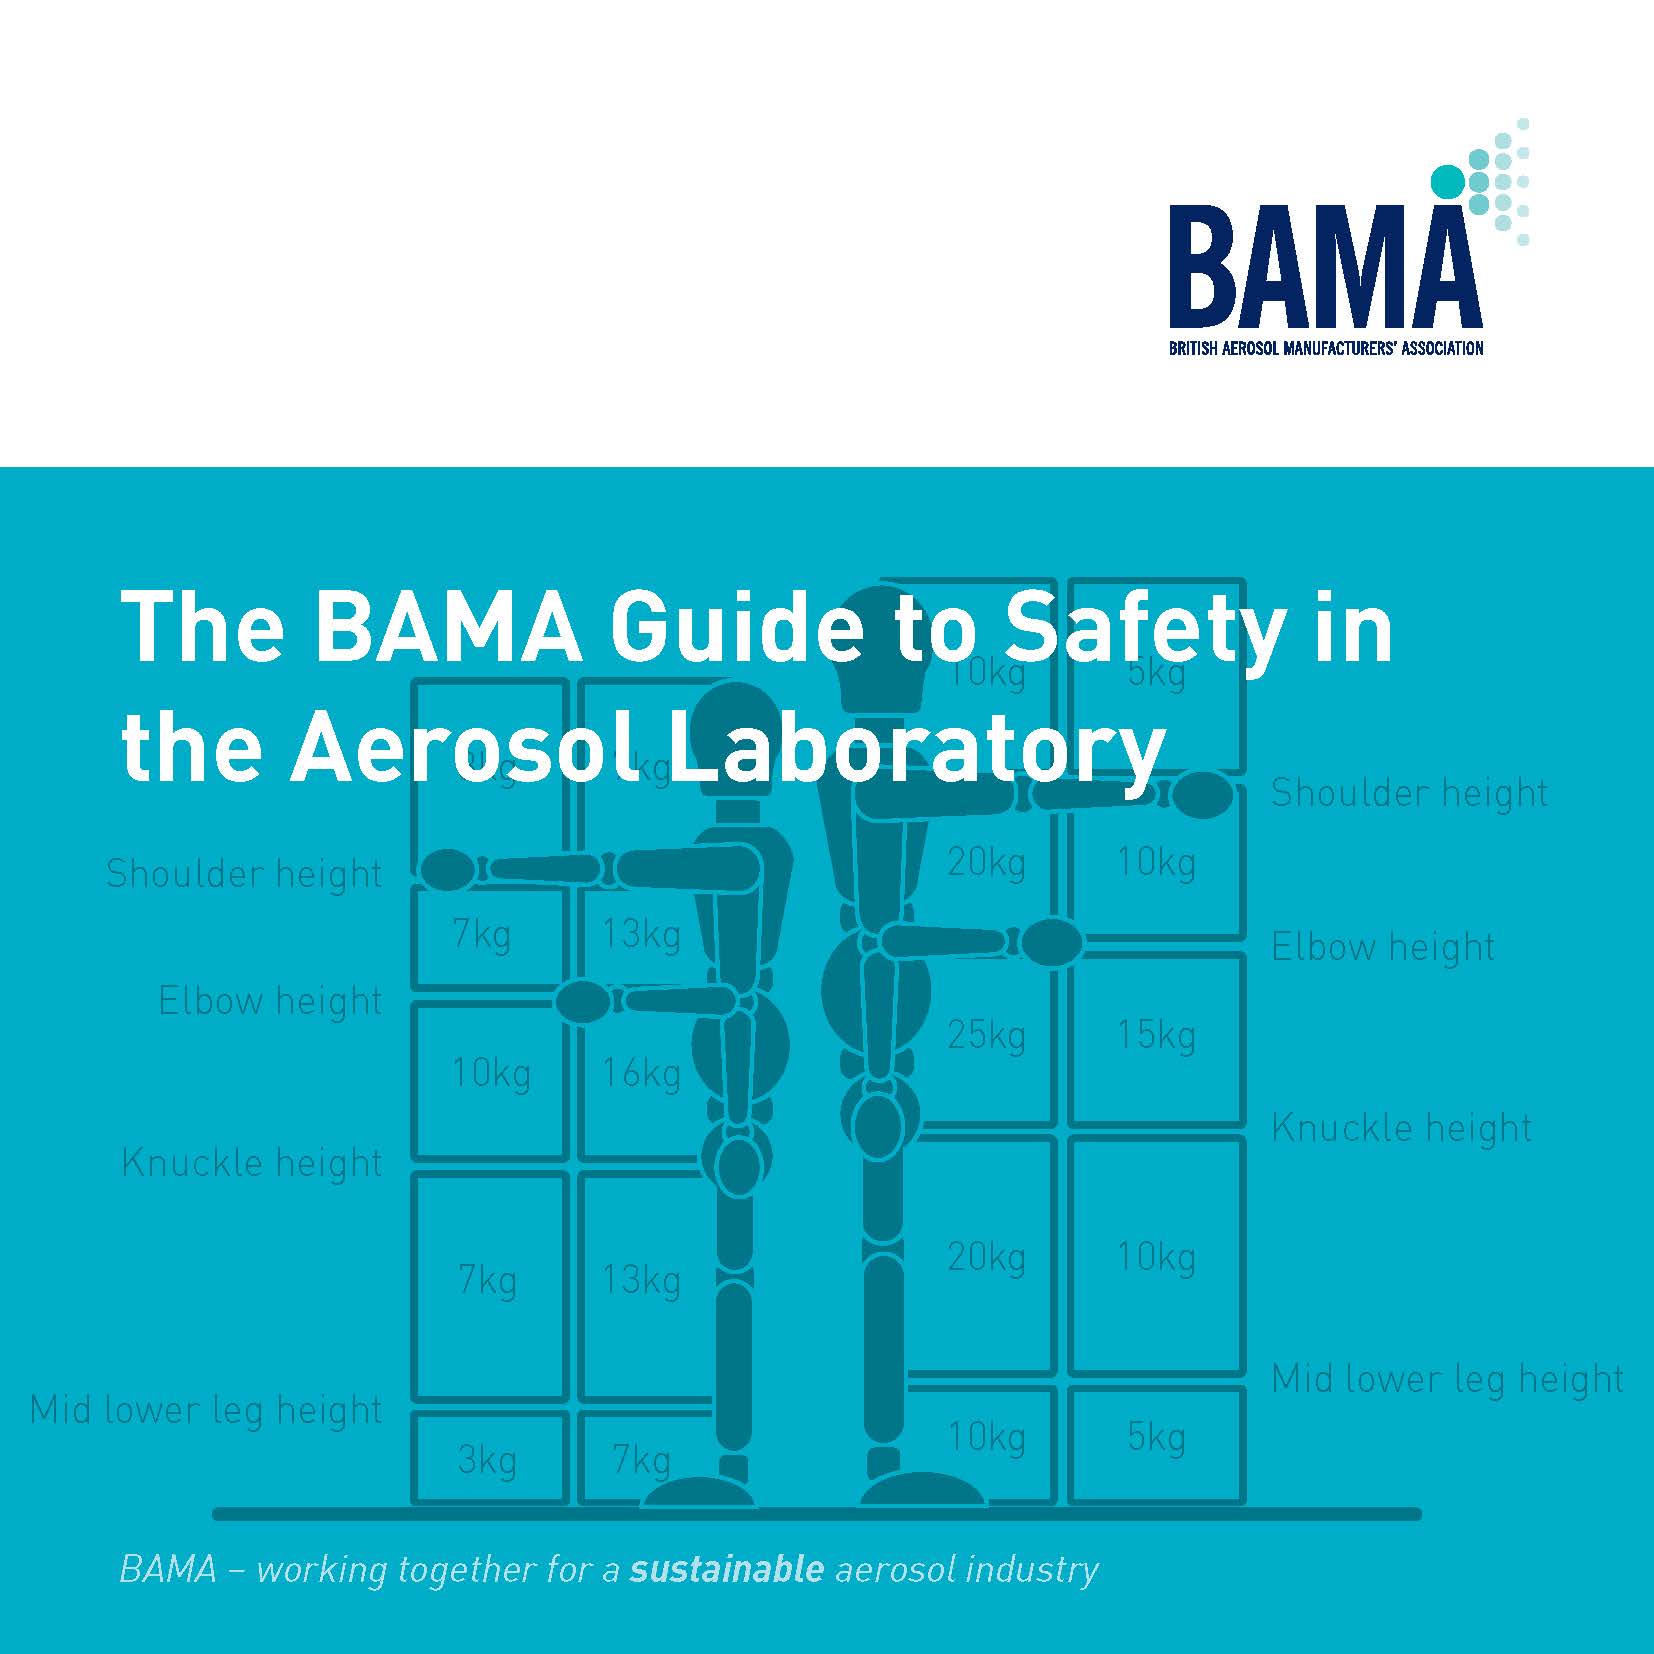 Guide to Safety in an Aerosol Laboratory